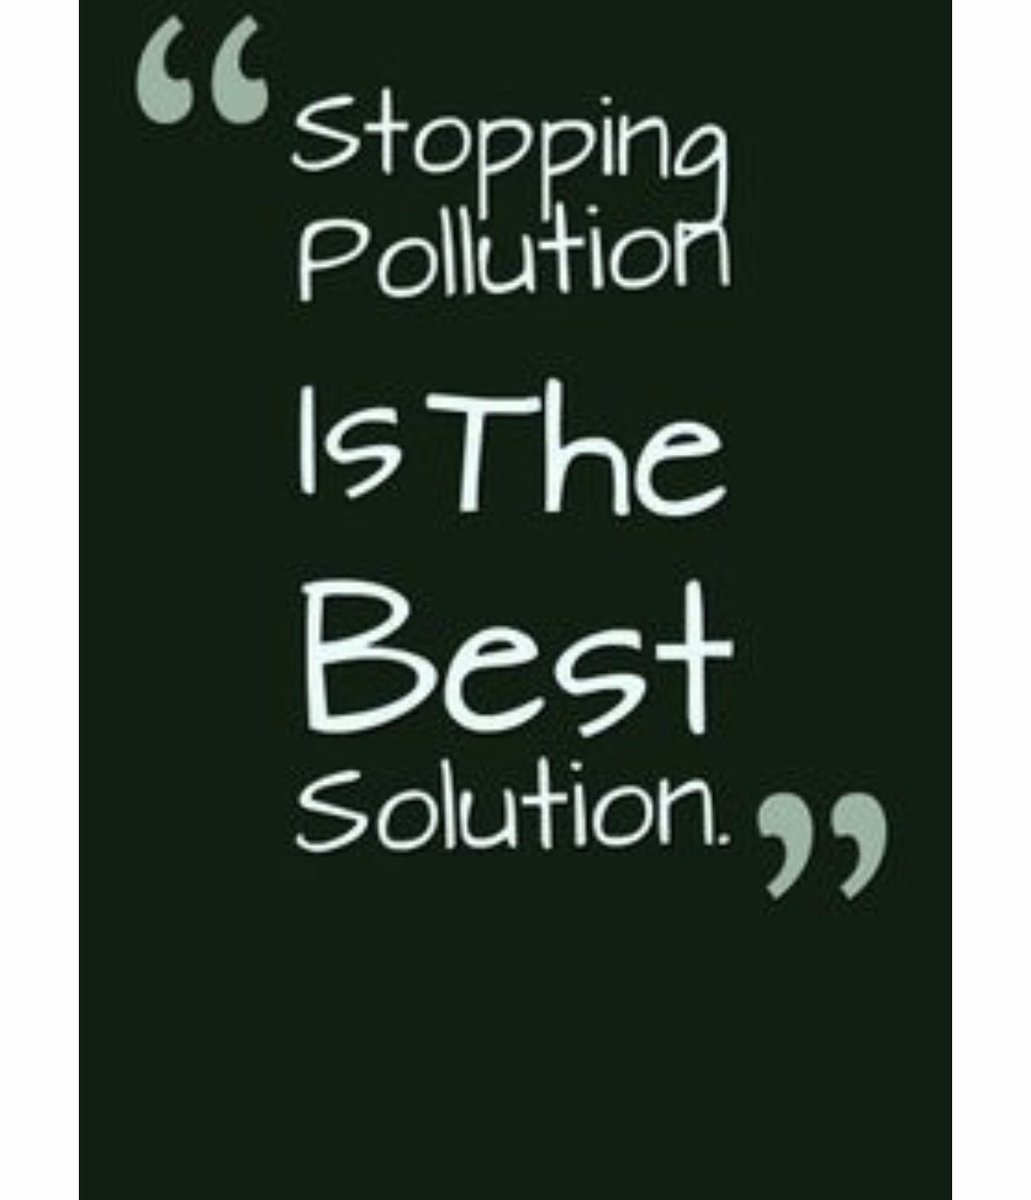 Be part of the solution....remember it starts with you and I. #stopairpollution #stopwaterpollution #StopPlasticPollution #SaveOurPlanet #fightclimatechange